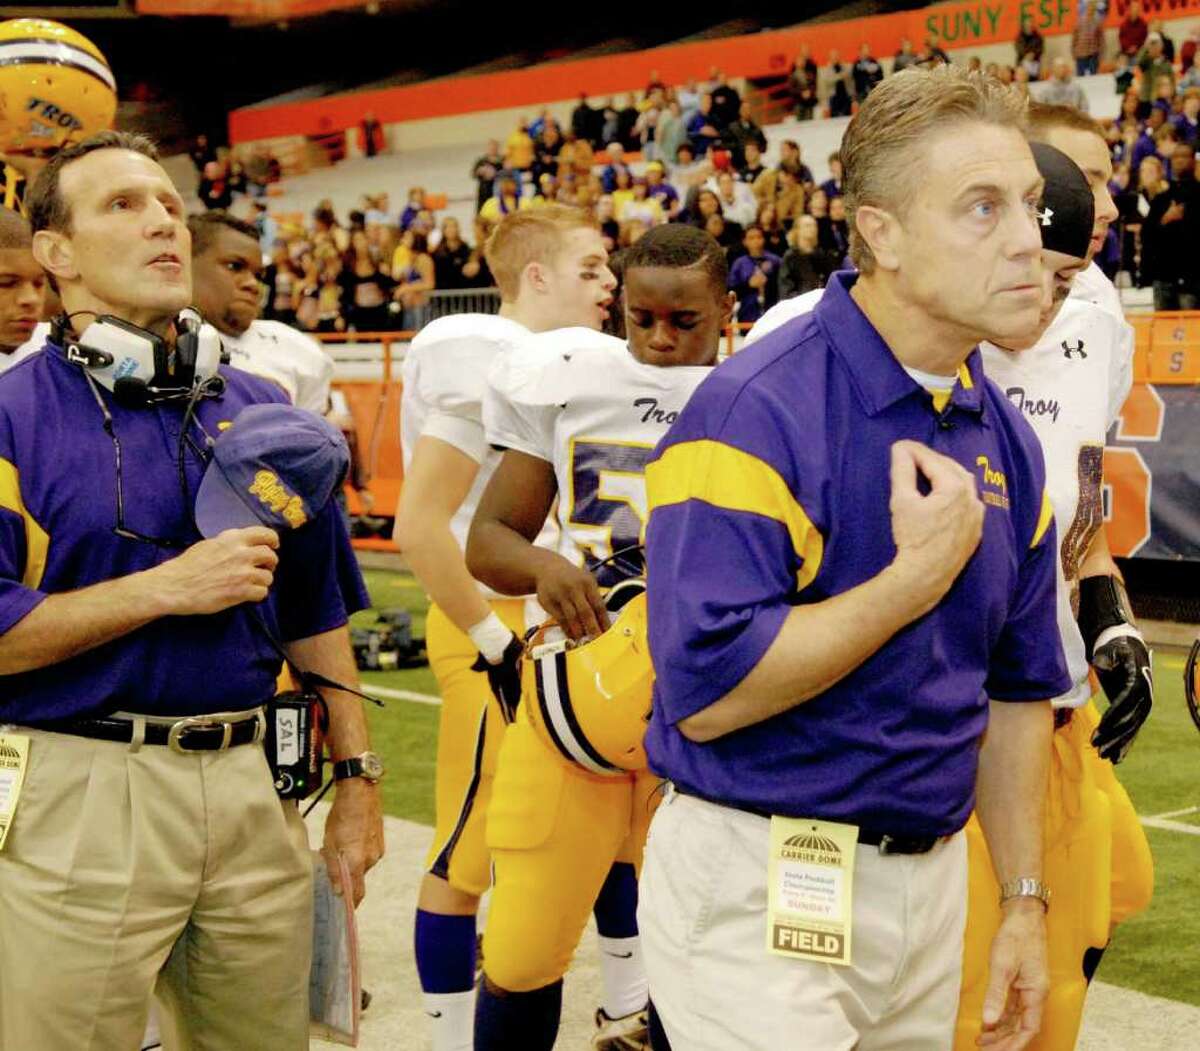 High school football -- Troy coach Jack Burger, right, blesses himself at the conclusion of the Nation Anthem before the Class AA state championship game. (Luanne M. Ferris / Times Union)